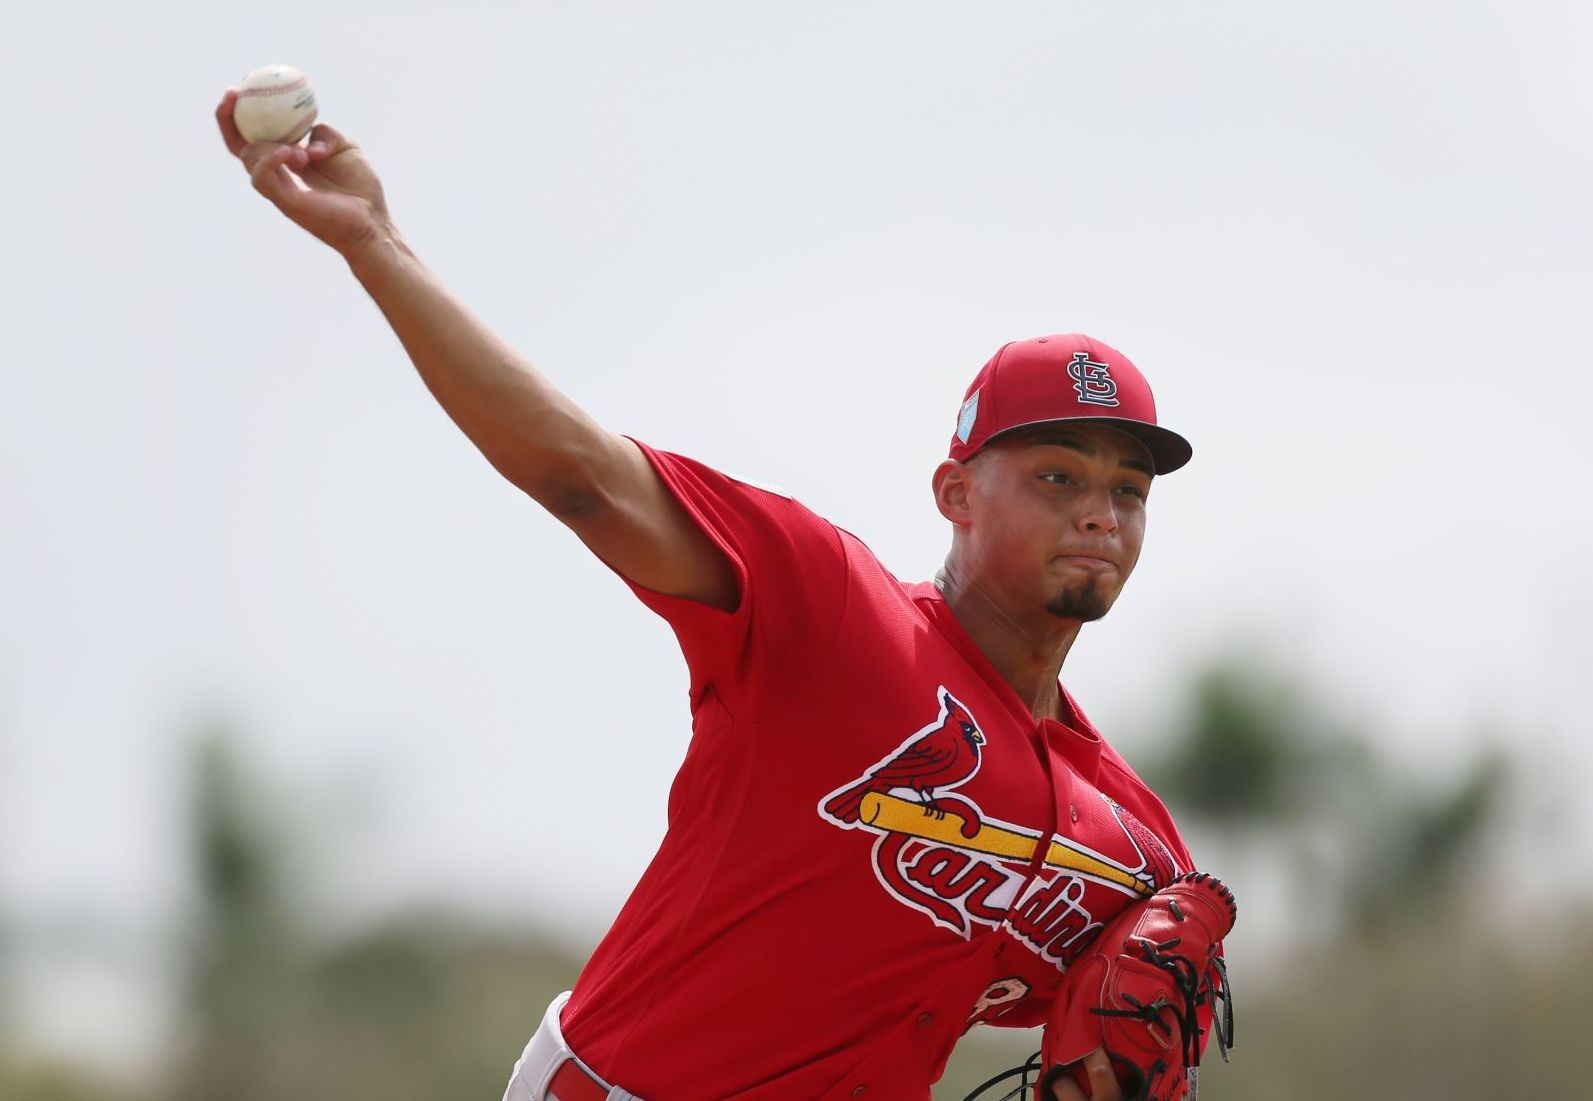 Cardinals decide Hicks is ready now, promote power pitcher for opening day